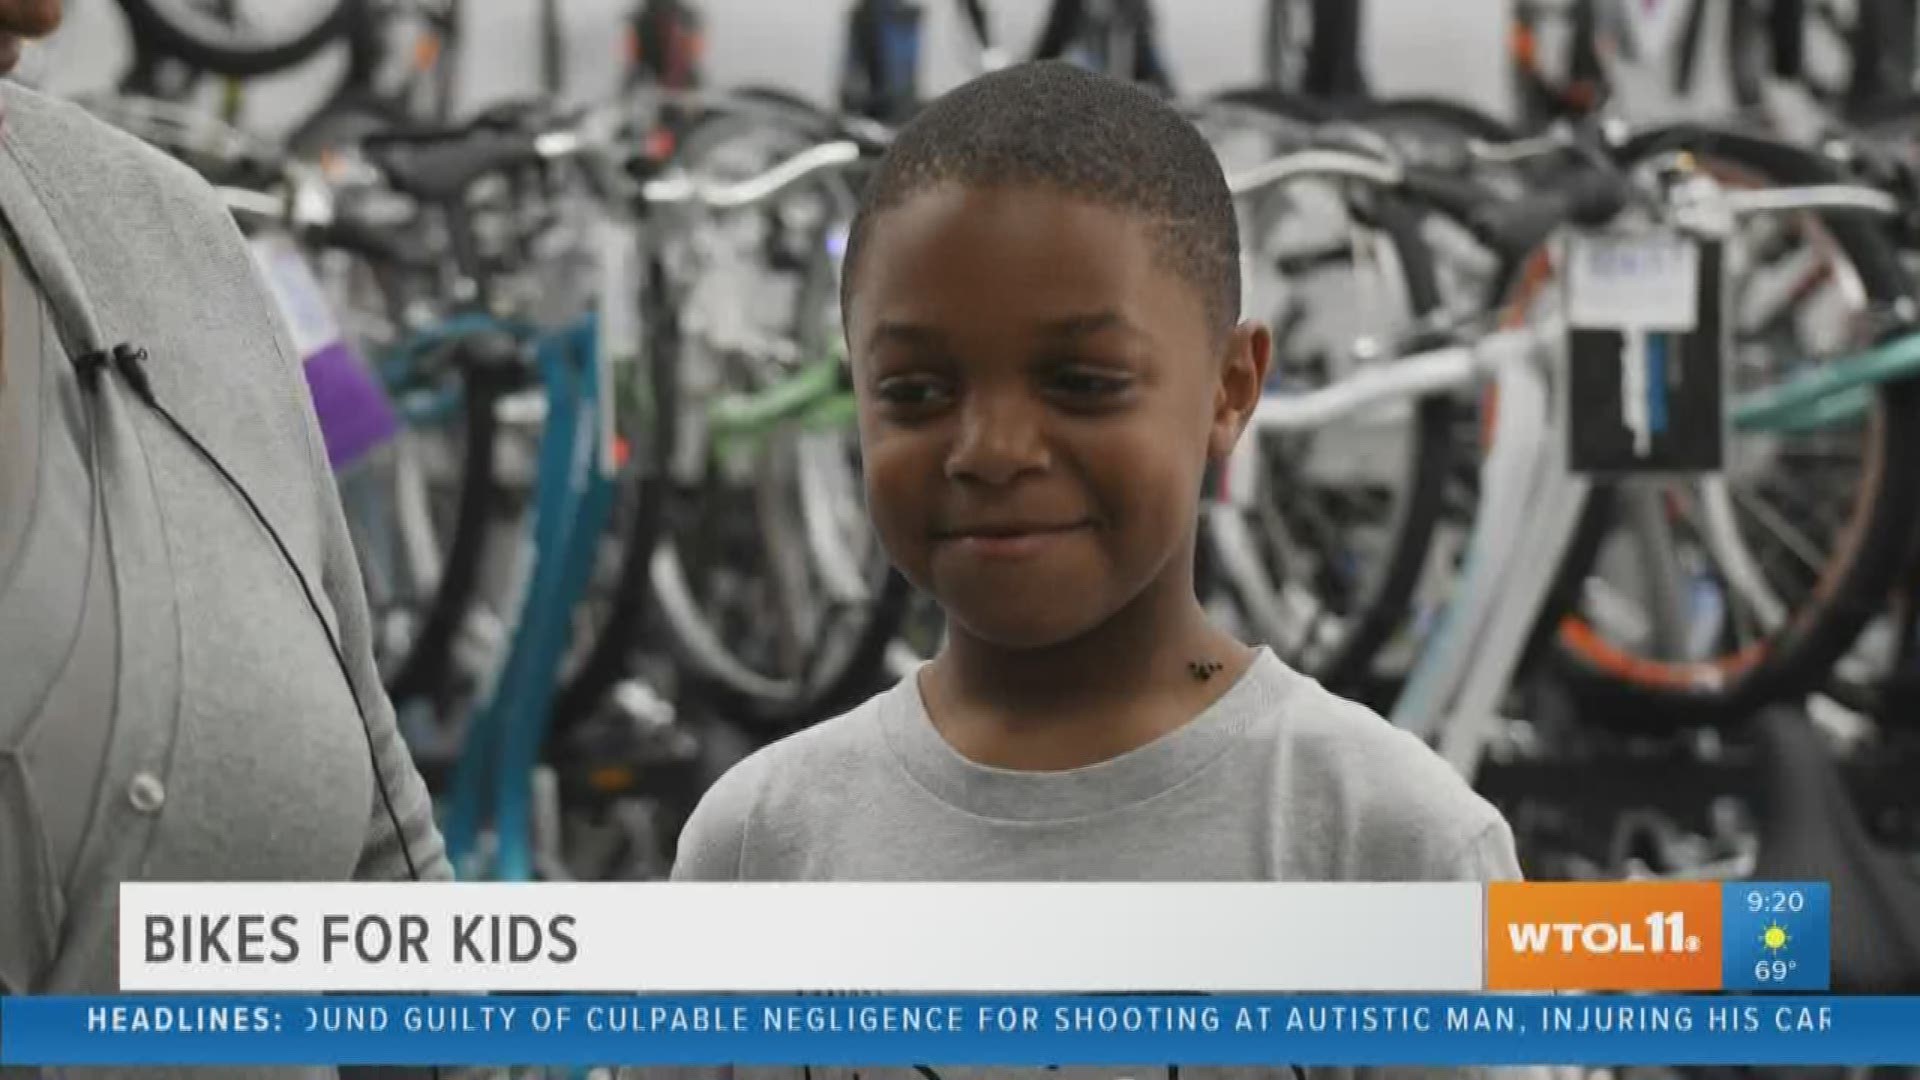 Here's why Rhylen Marte is this week's recipient of a brand new bike form Wersell's Bike Shop!